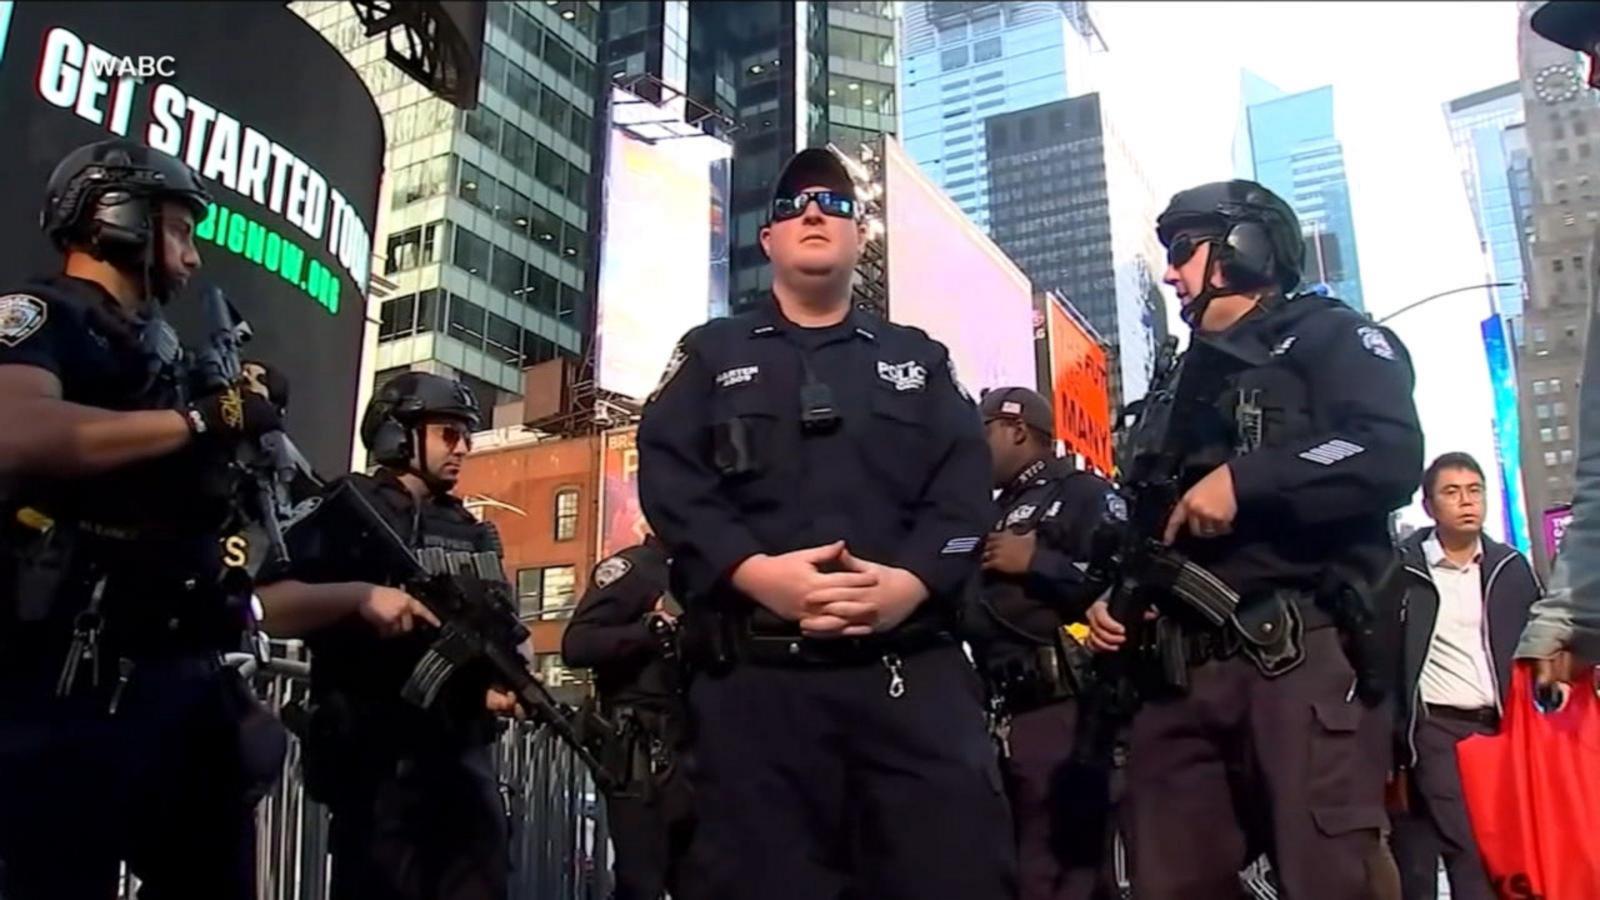 VIDEO: NYPD preps security operation ahead of Times Square ball drop